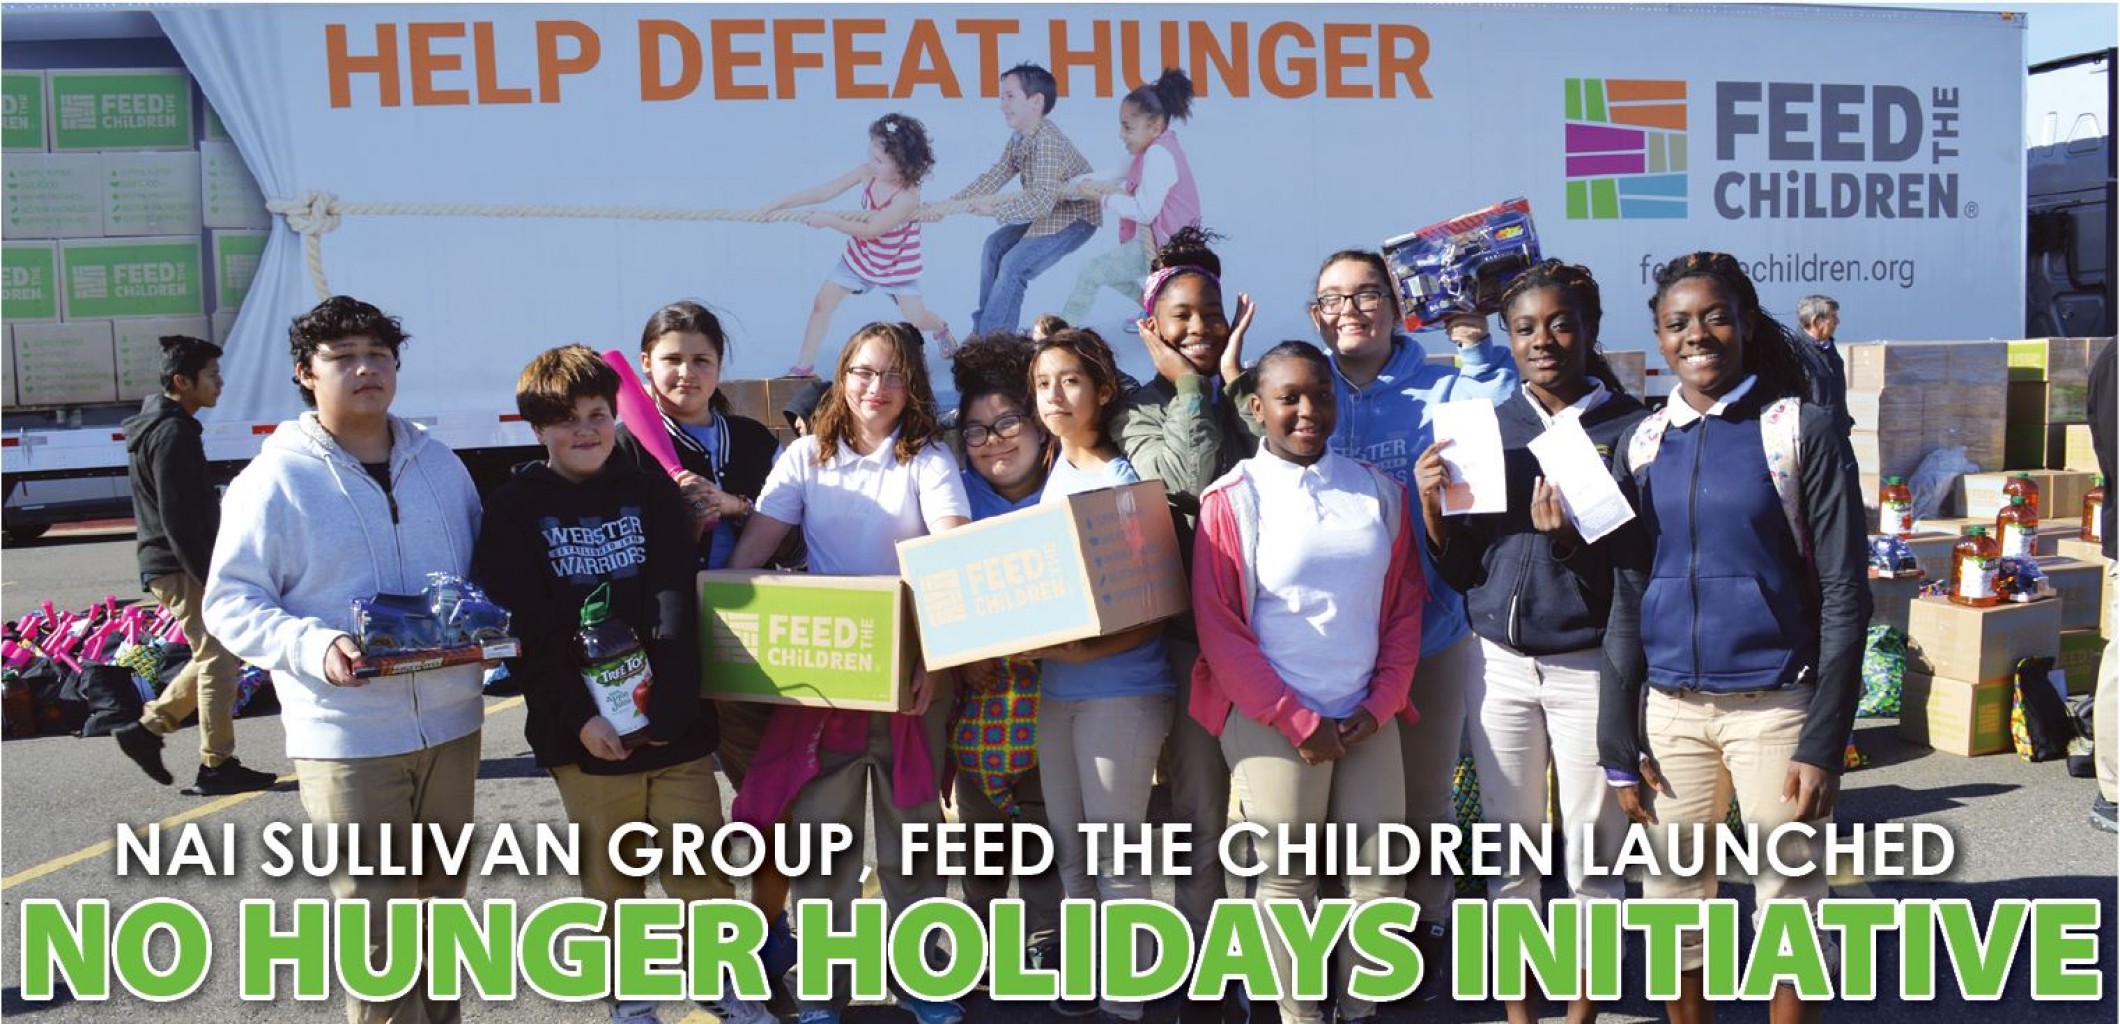 NAI SULLIVAN GROUP & FEED THE CHILDREN Launched NO HUNGER HOLIDAYS INITIATIVE